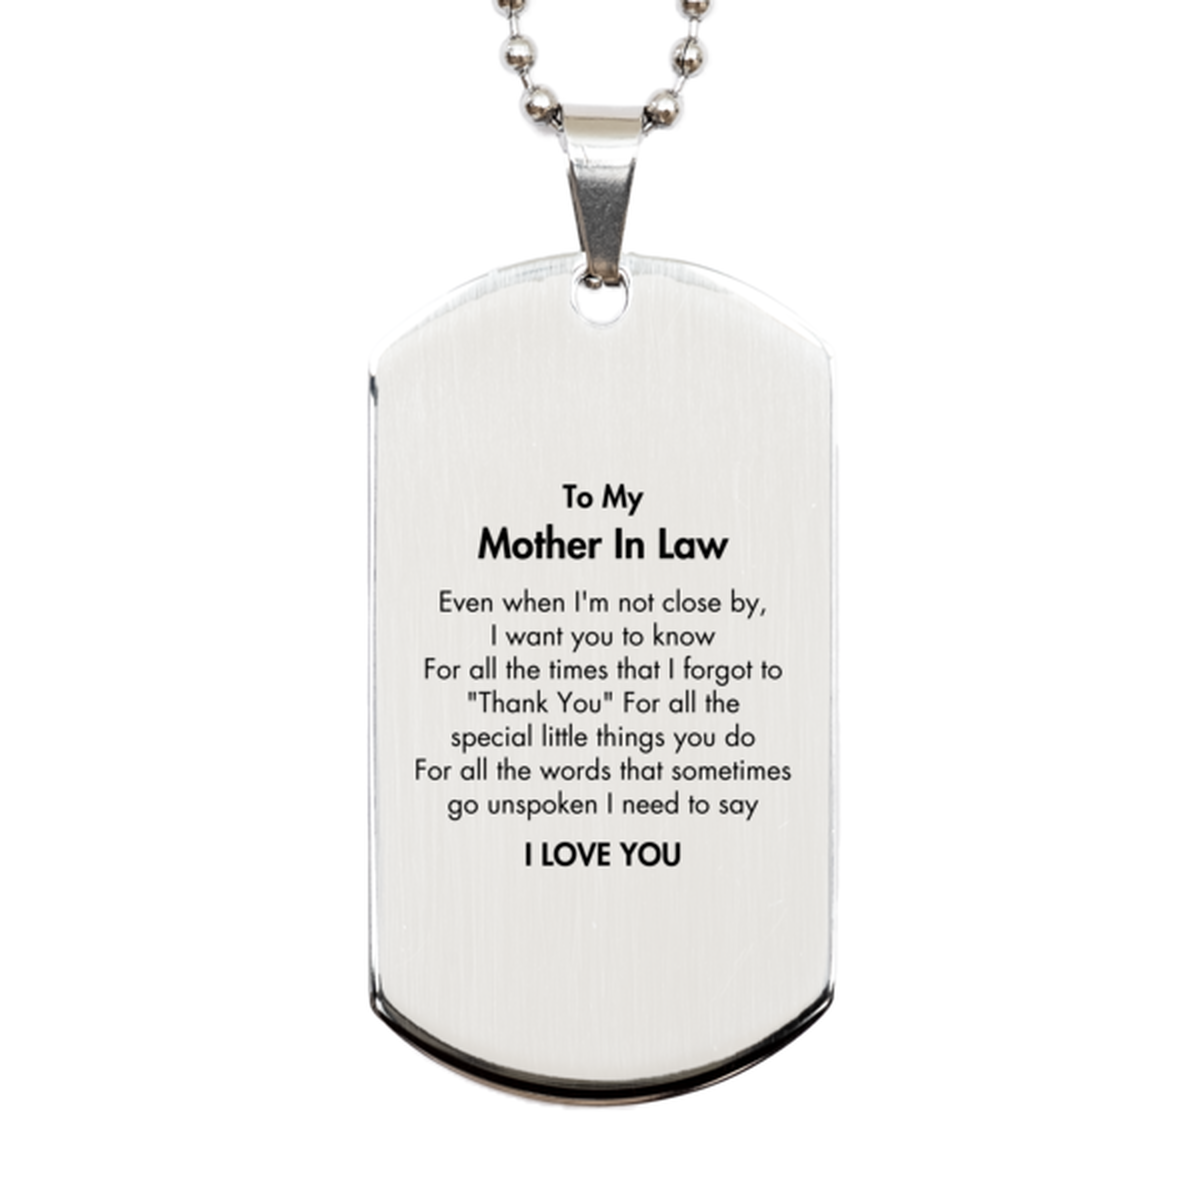 Thank You Gifts for Mother In Law, Keepsake Silver Dog Tag Gifts for Mother In Law Birthday Mother's day Father's Day Mother In Law For all the words That sometimes go unspoken I need to say I LOVE YOU